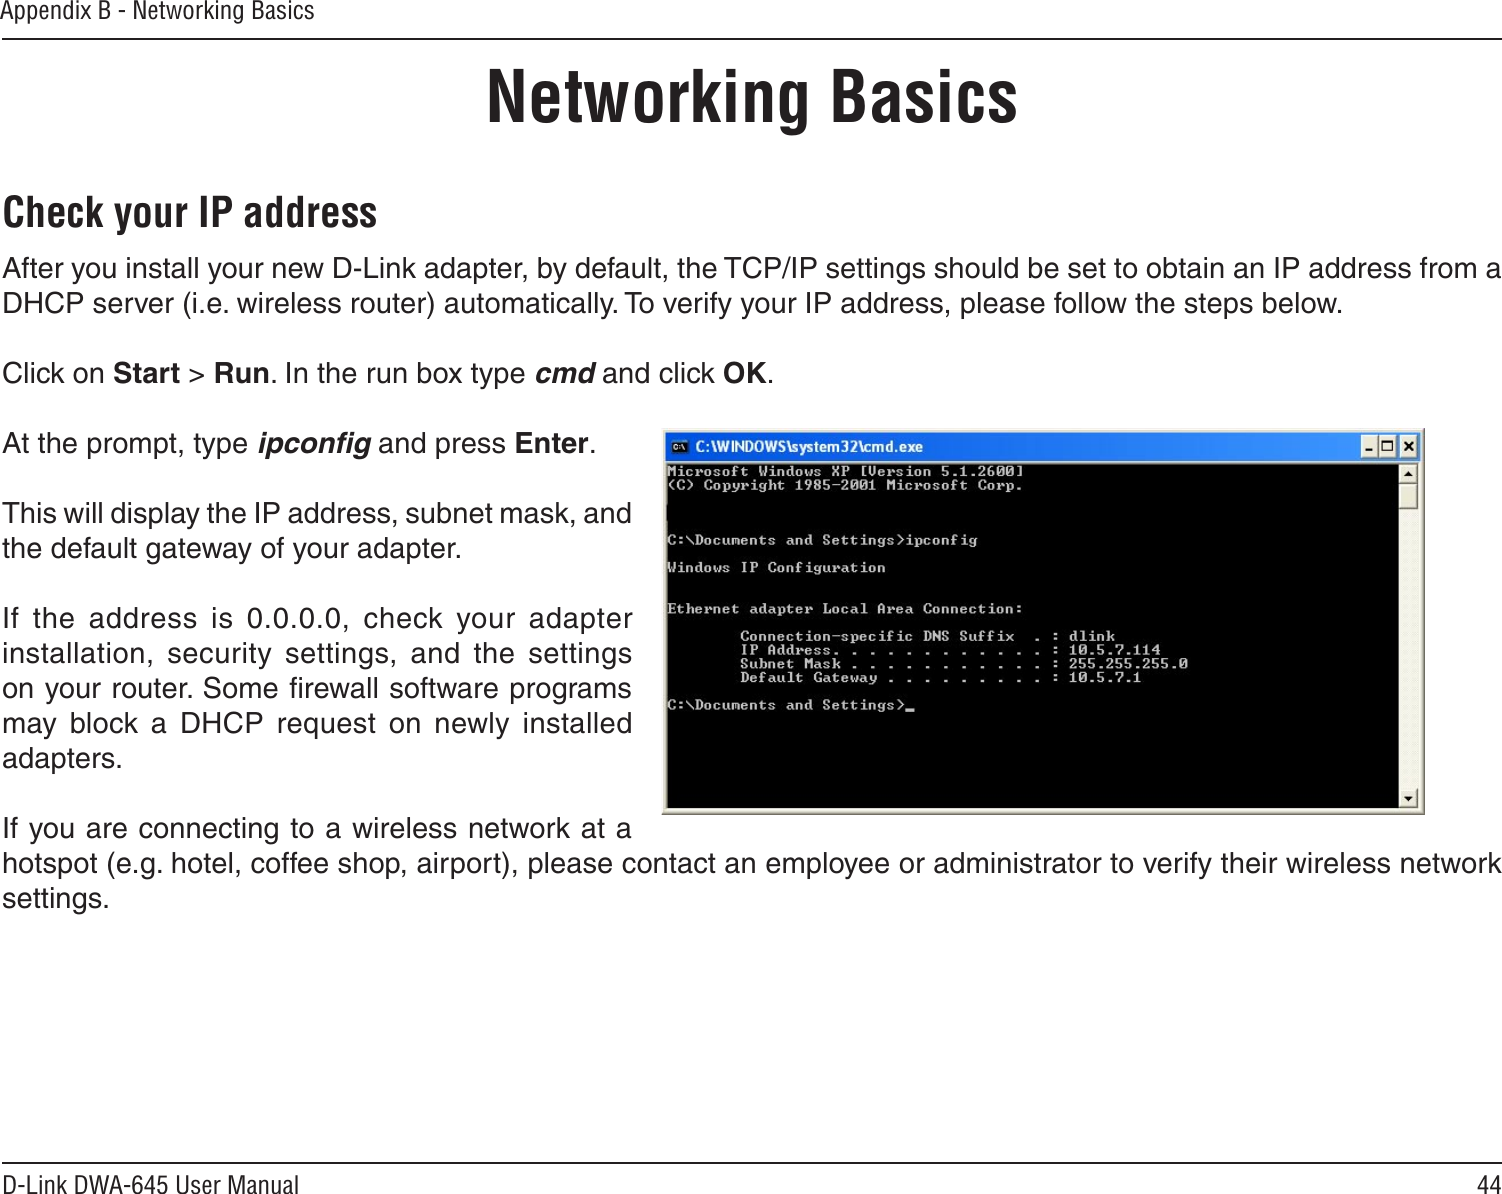 44D-Link DWA-645 User ManualAppendix B - Networking BasicsNetworking BasicsCheck your IP addressAfter you install your new D-Link adapter, by default, the TCP/IP settings should be set to obtain an IP address from a DHCP server (i.e. wireless router) automatically. To verify your IP address, please follow the steps below.Click on Start &gt; Run. In the run box type cmd and click OK.At the prompt, type ipconﬁg and press Enter.This will display the IP address, subnet mask, and the default gateway of your adapter.If  the  address  is  0.0.0.0,  check  your  adapter installation,  security  settings,  and  the  settings on your router. Some ﬁrewall software programs may  block  a  DHCP  request  on  newly  installed adapters. If you are connecting to a wireless network at a hotspot (e.g. hotel, coffee shop, airport), please contact an employee or administrator to verify their wireless network settings.